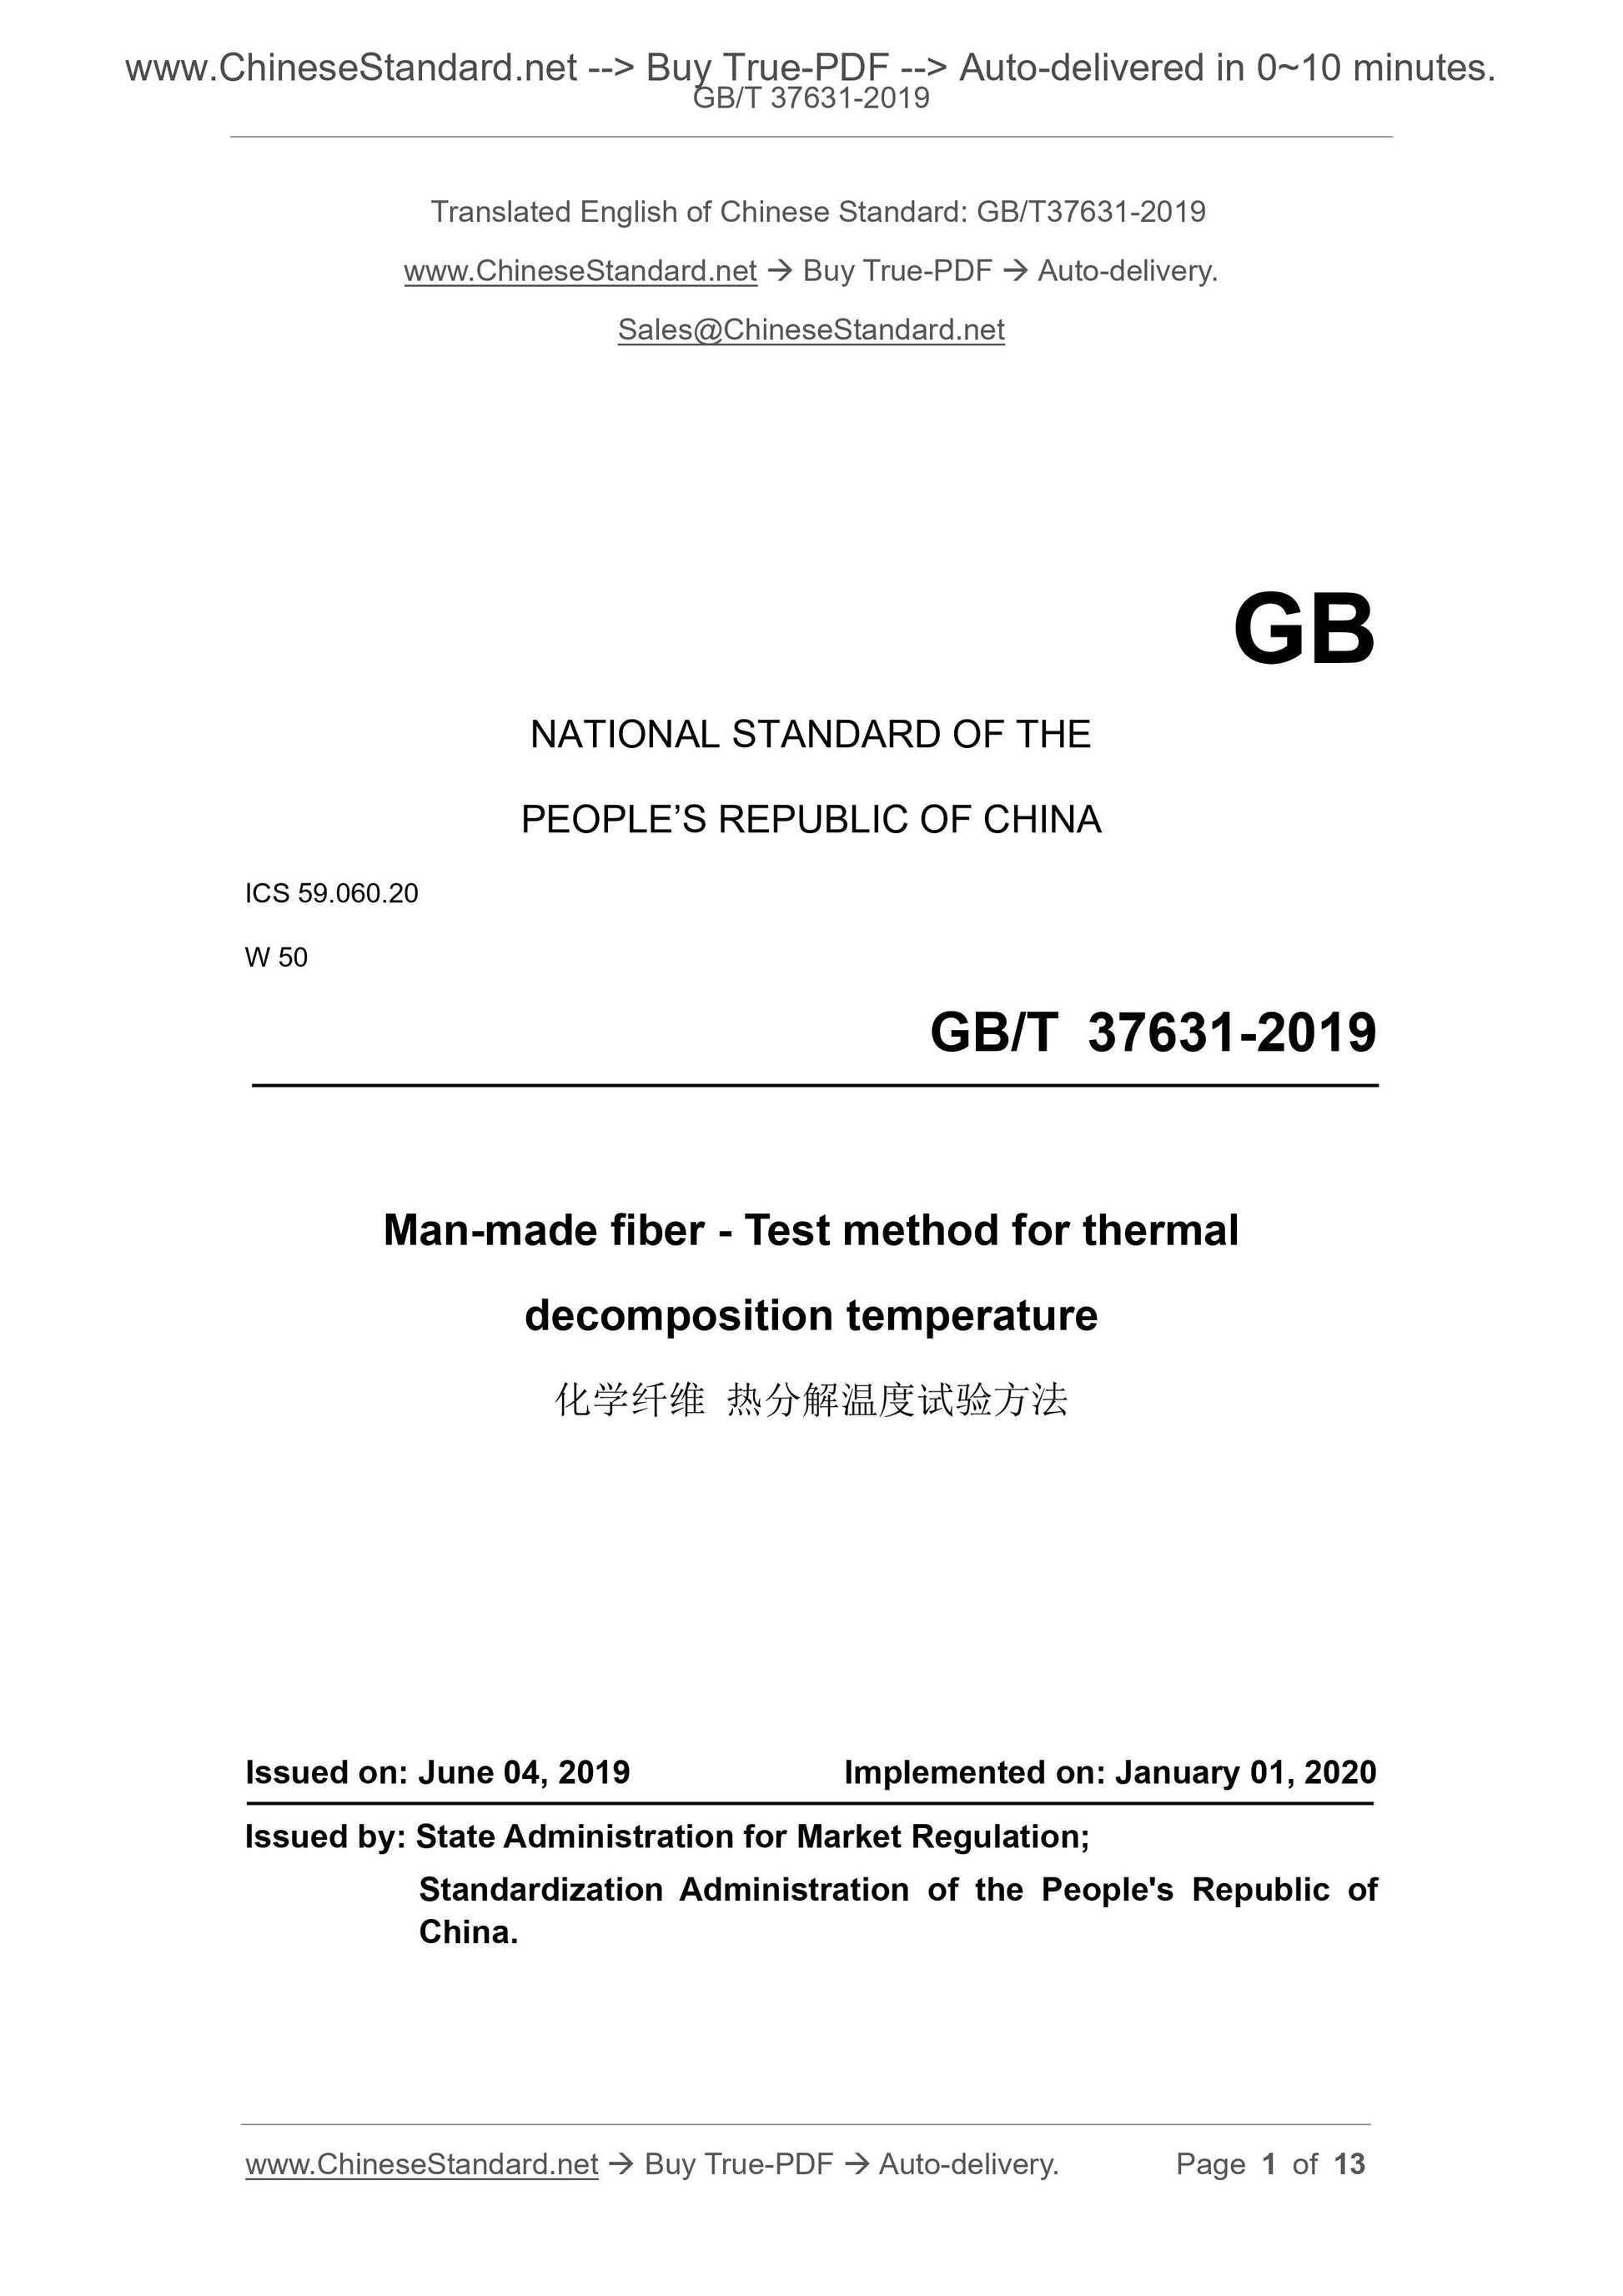 GB/T 37631-2019 Page 1